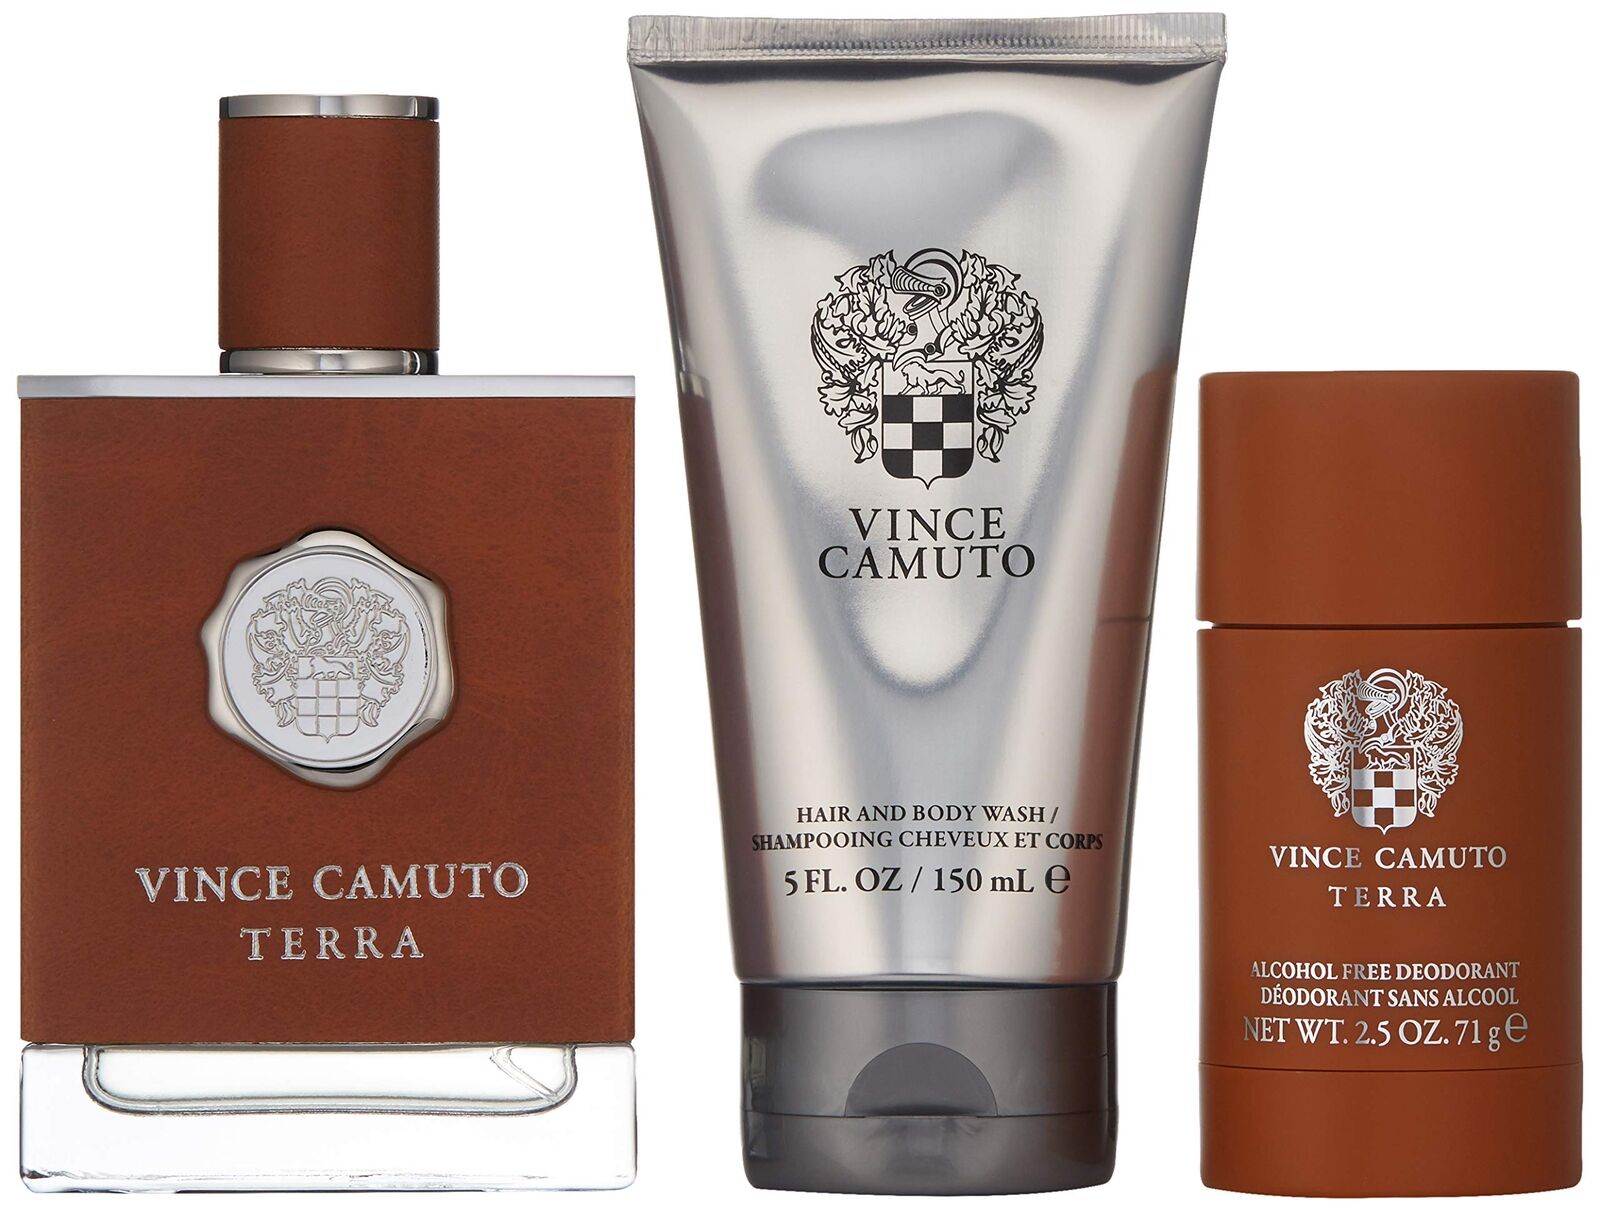 Vince Camuto Homme 3.4 oz. Gift Set – Face and Body Shoppe